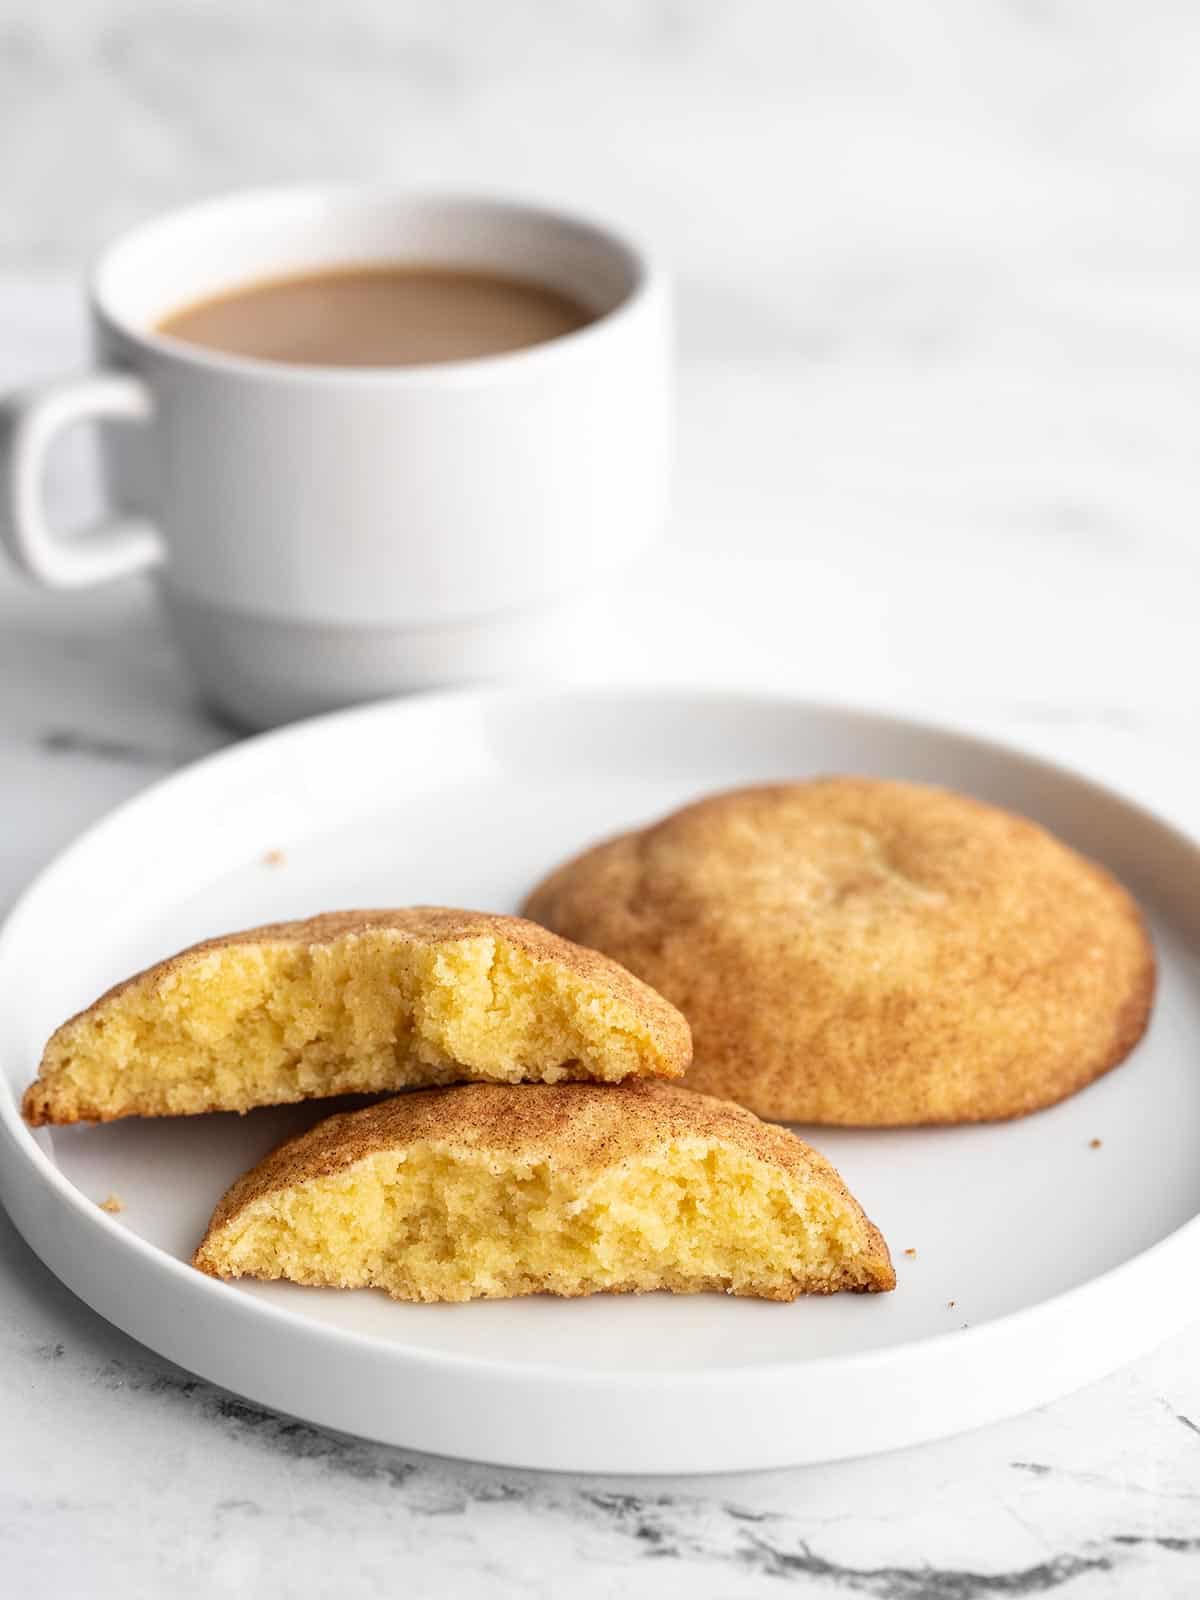 Two snickerdoodles on a plate with a cup of coffee in back